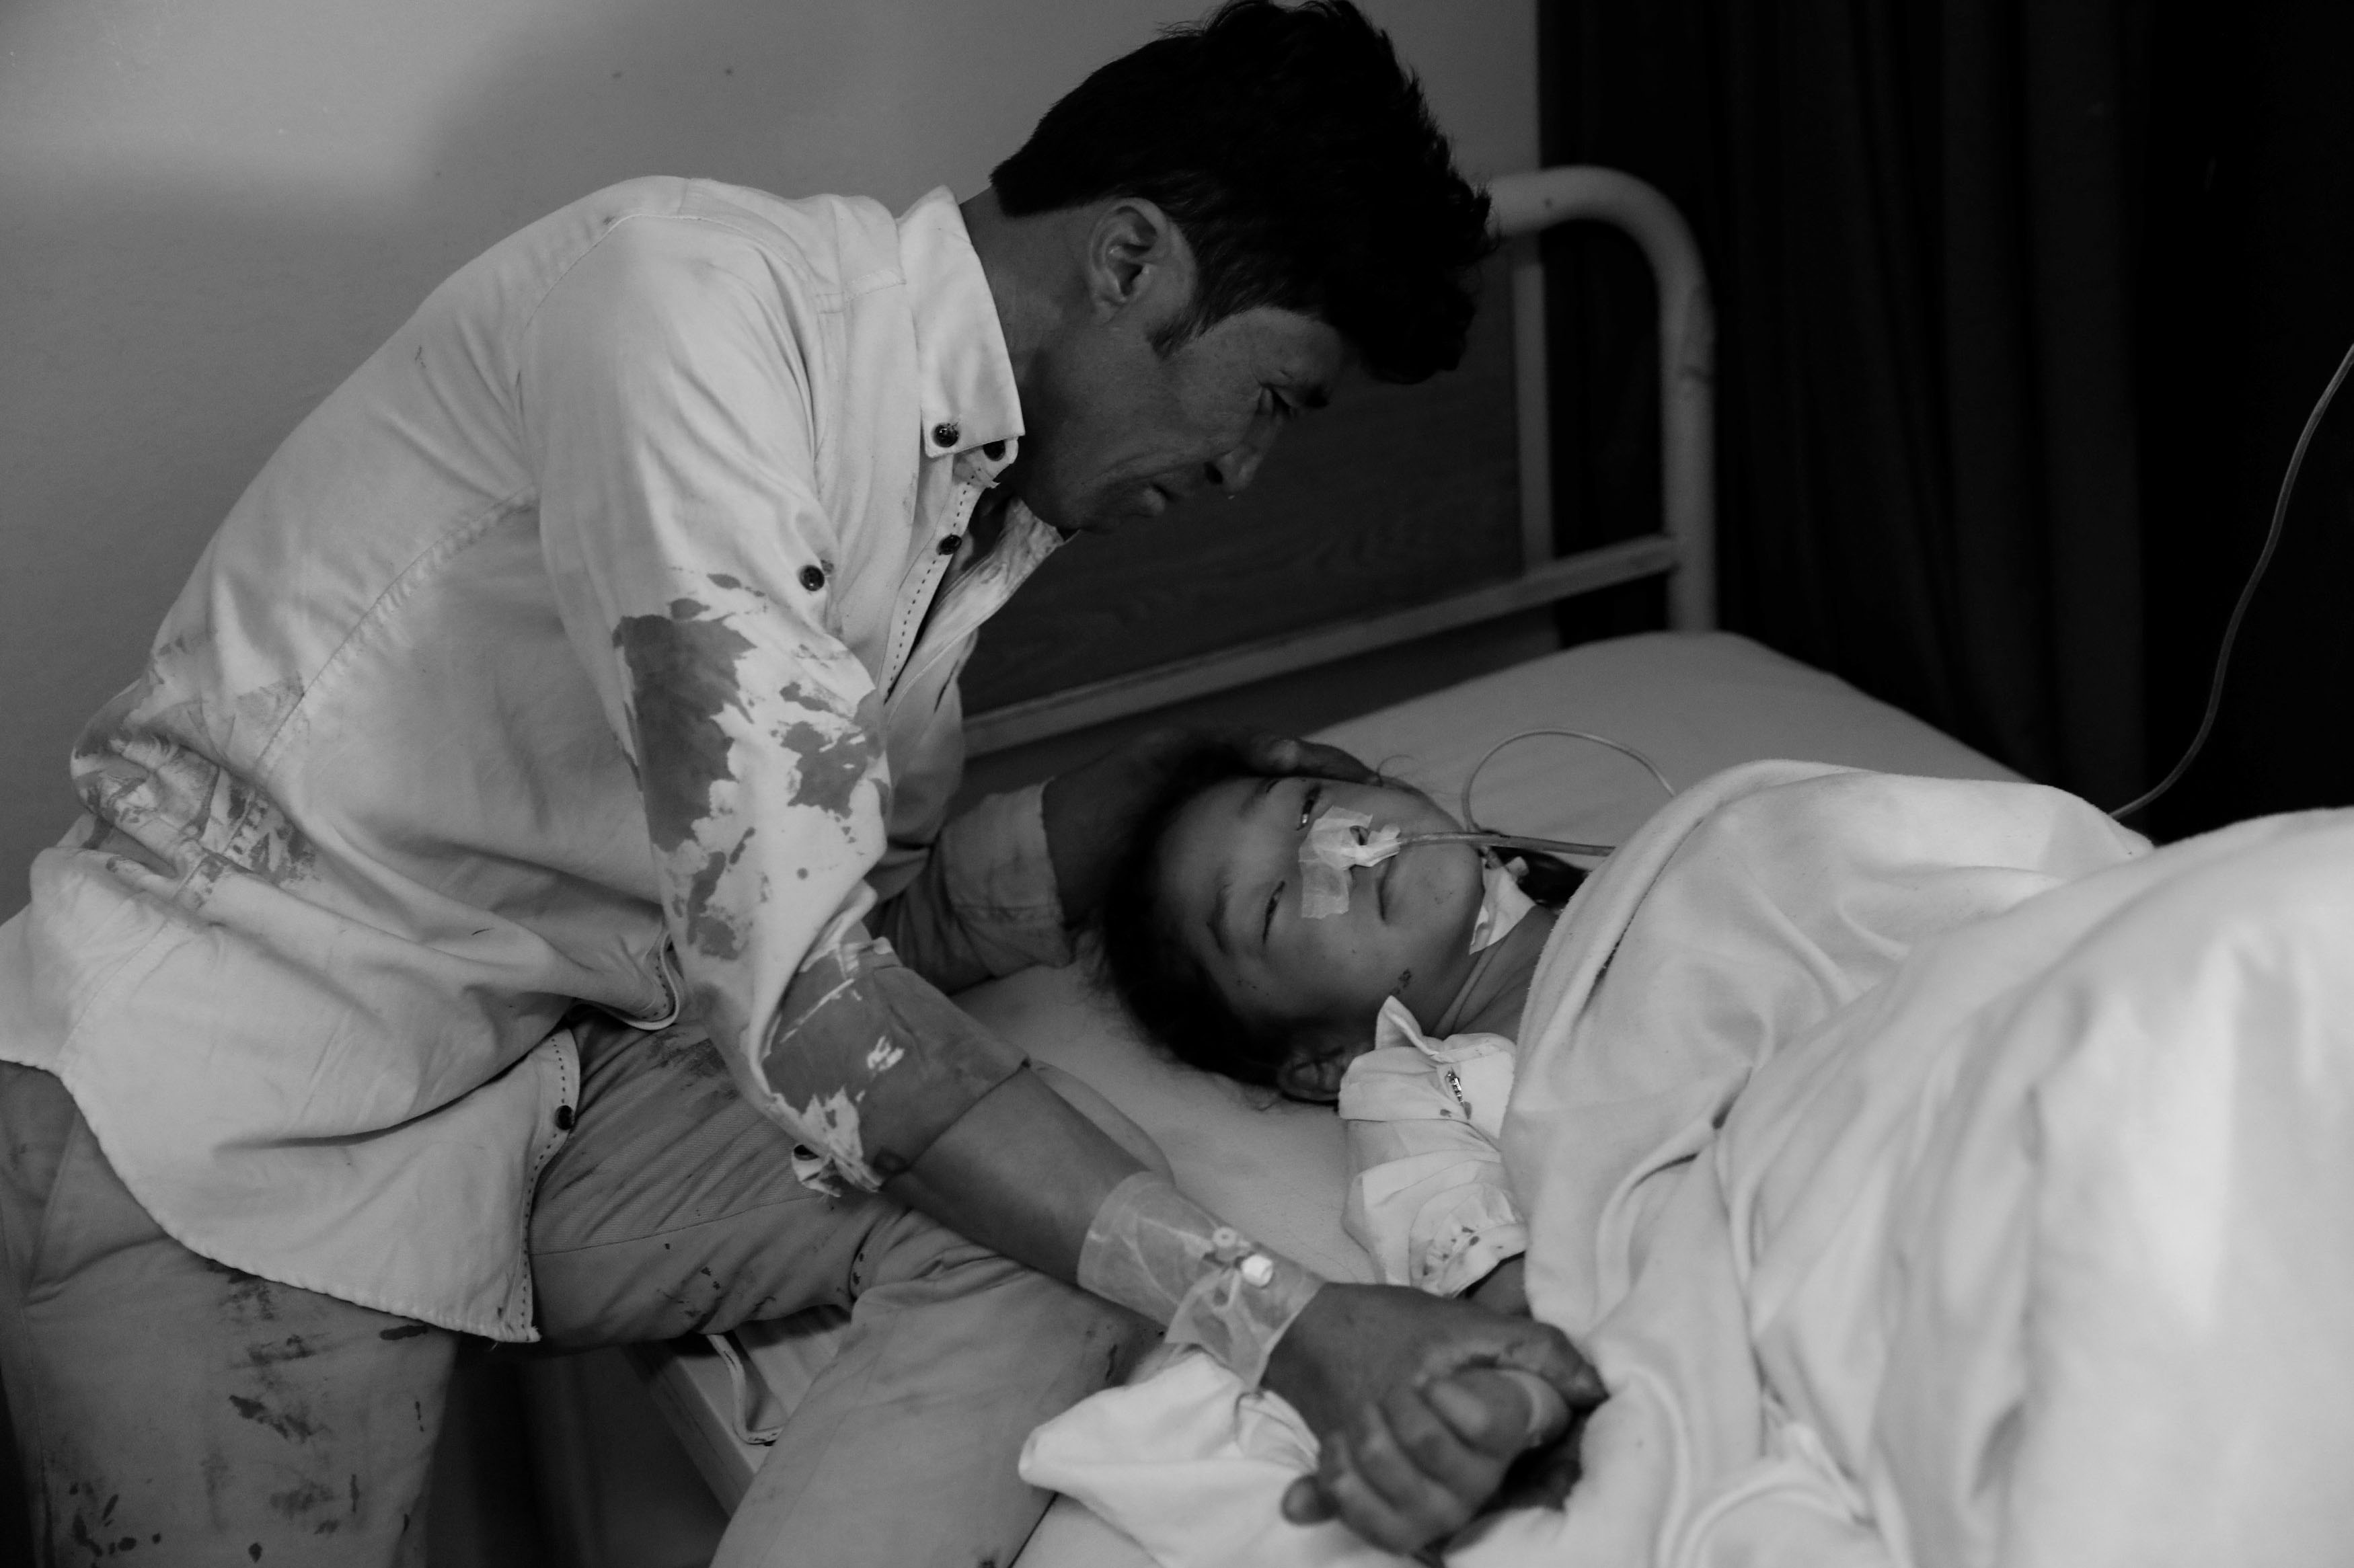 An injured girl receives a treatment at a hospital after a suicide attack in Kabul, Afghanistan April 22, 2018. Photo: REUTERS